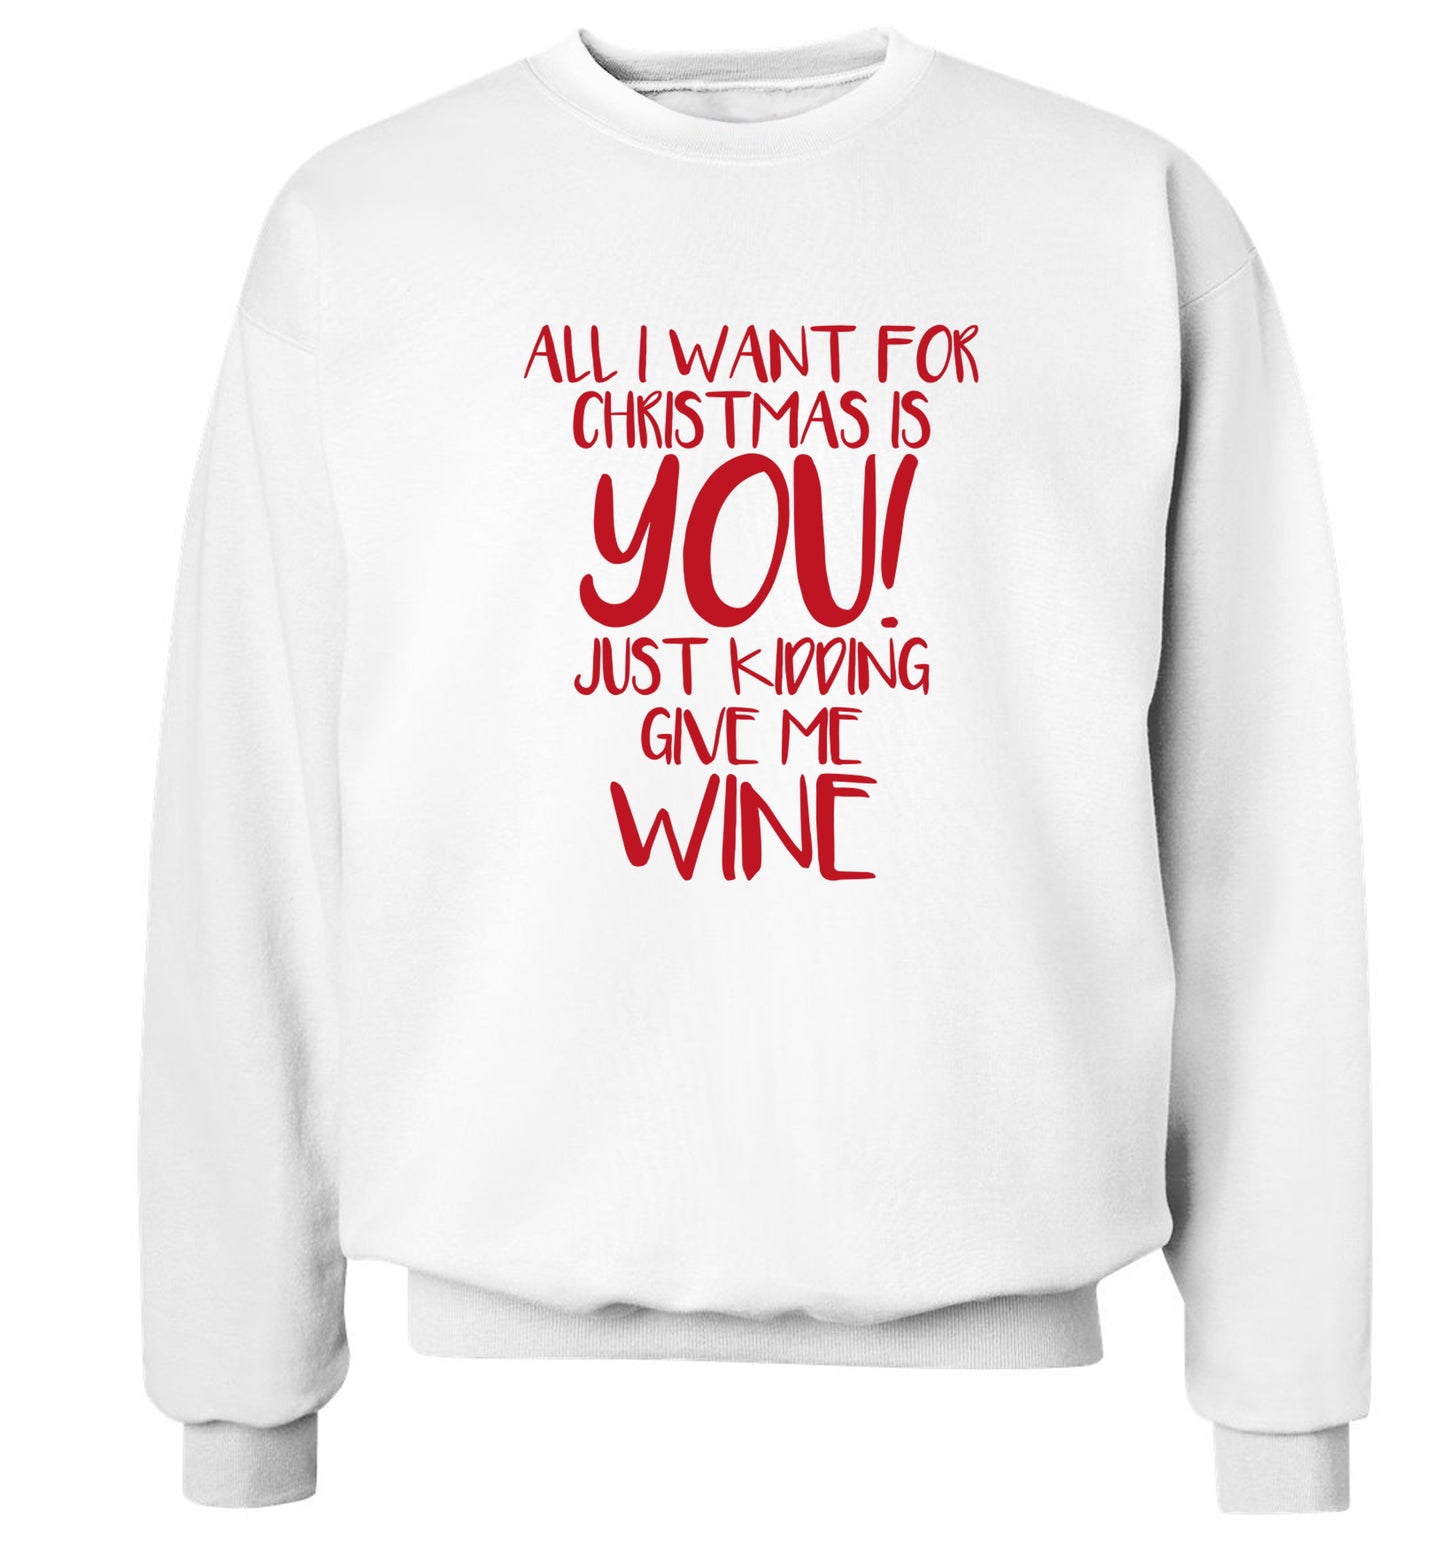 All I want for christmas is you just kidding give me the wine Adult's unisex white Sweater 2XL